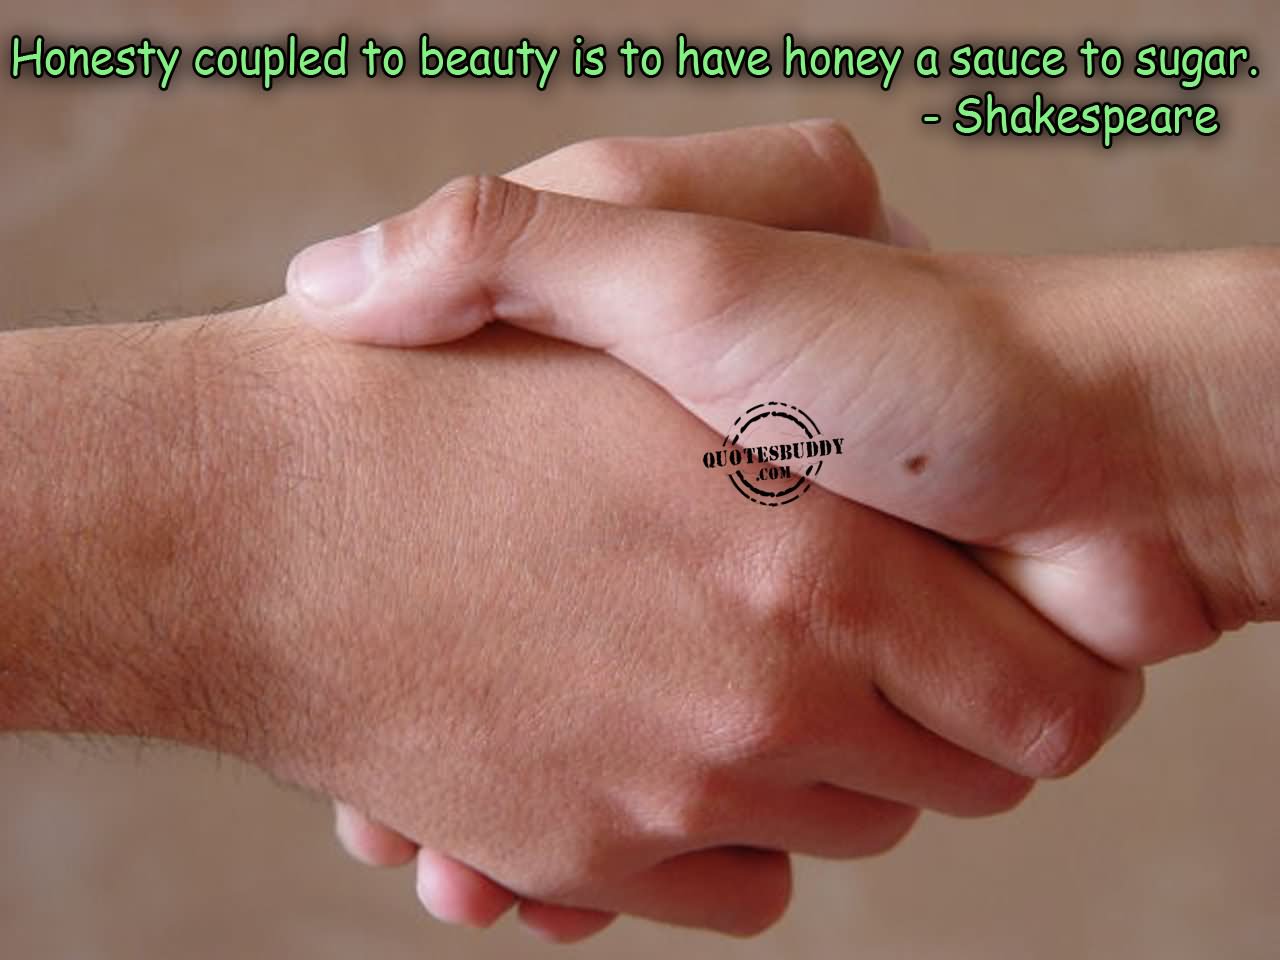 Honesty coupled to beauty, is to have honey a sauce to sugar.  - Shakespeare